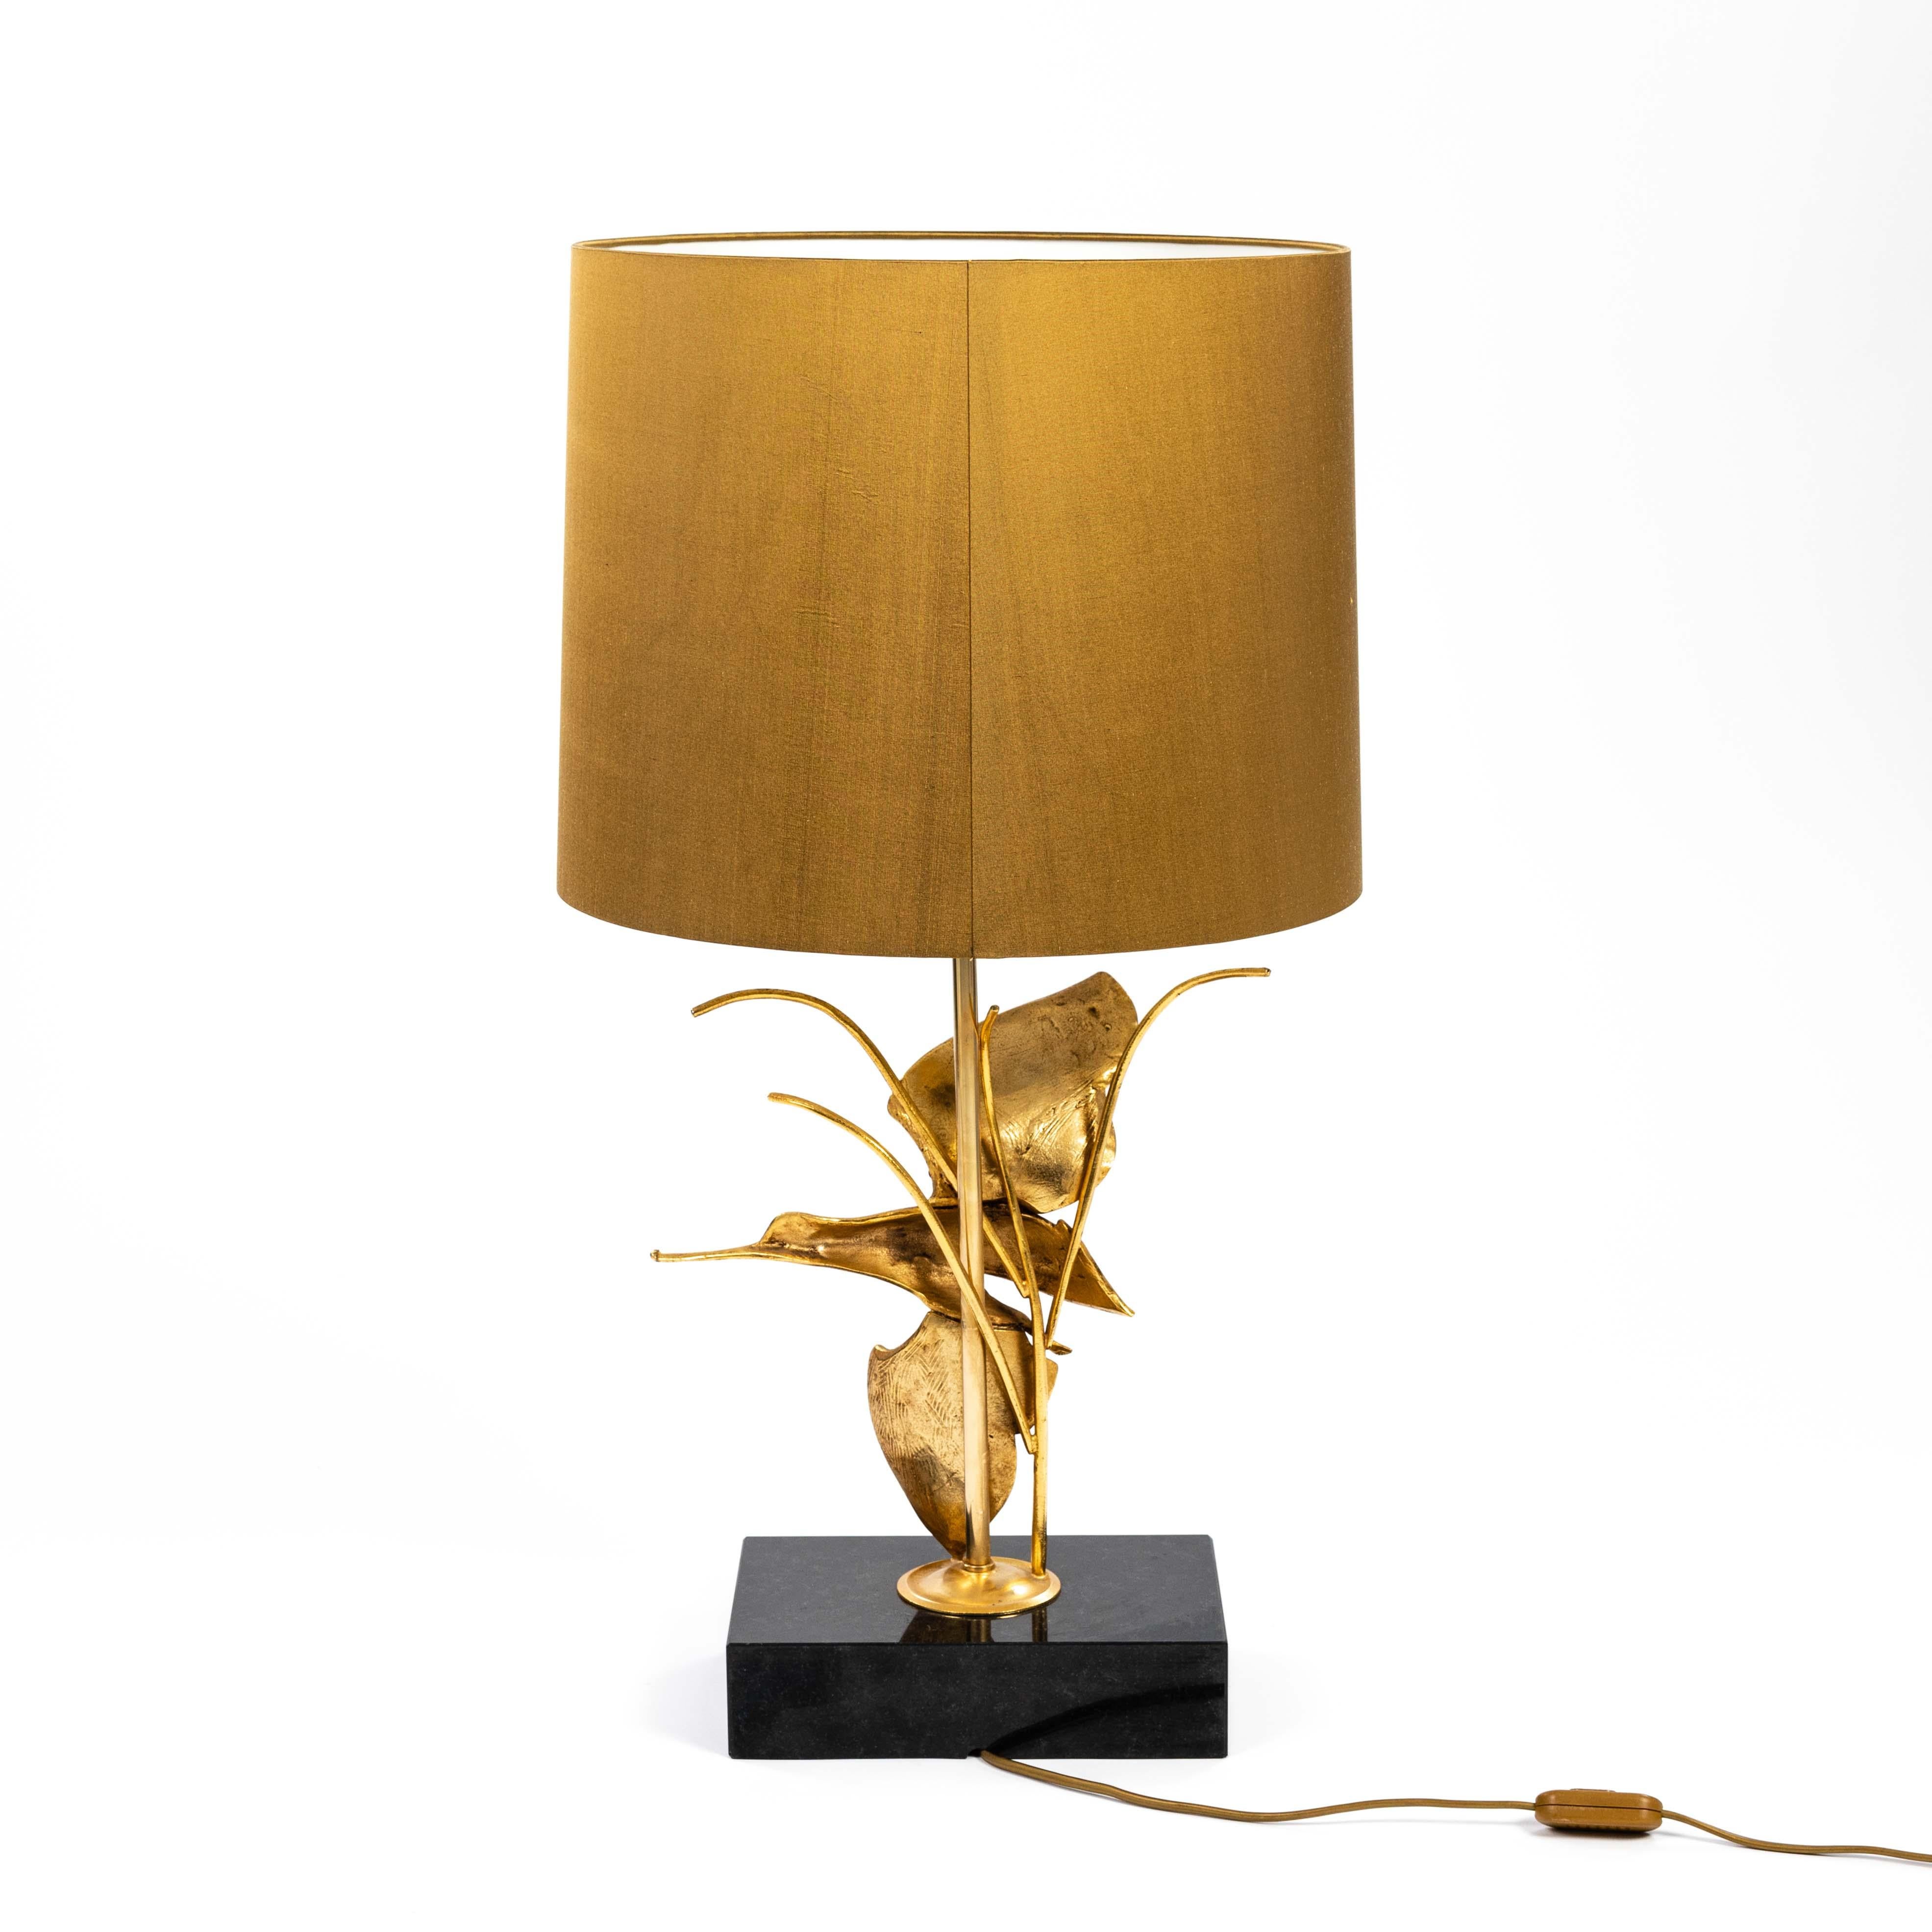 Italian Midcentury Gilded Brass Bird Table Lamp by GM Italia 1950s In Good Condition For Sale In Salzburg, AT